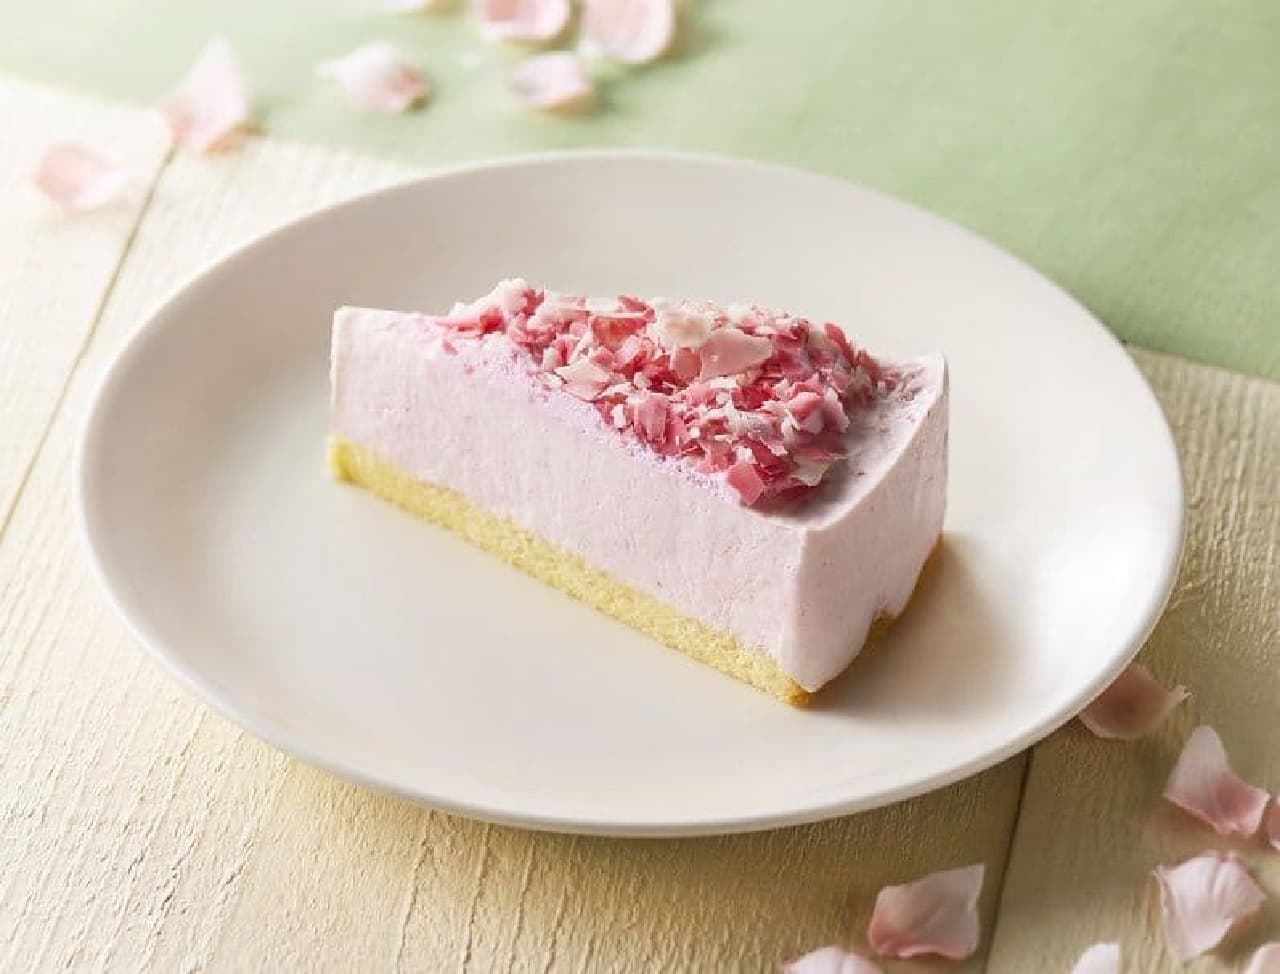 Tully's Coffee "Tom & Jerry Soft Cherry & Strawberry Mousse Cake".